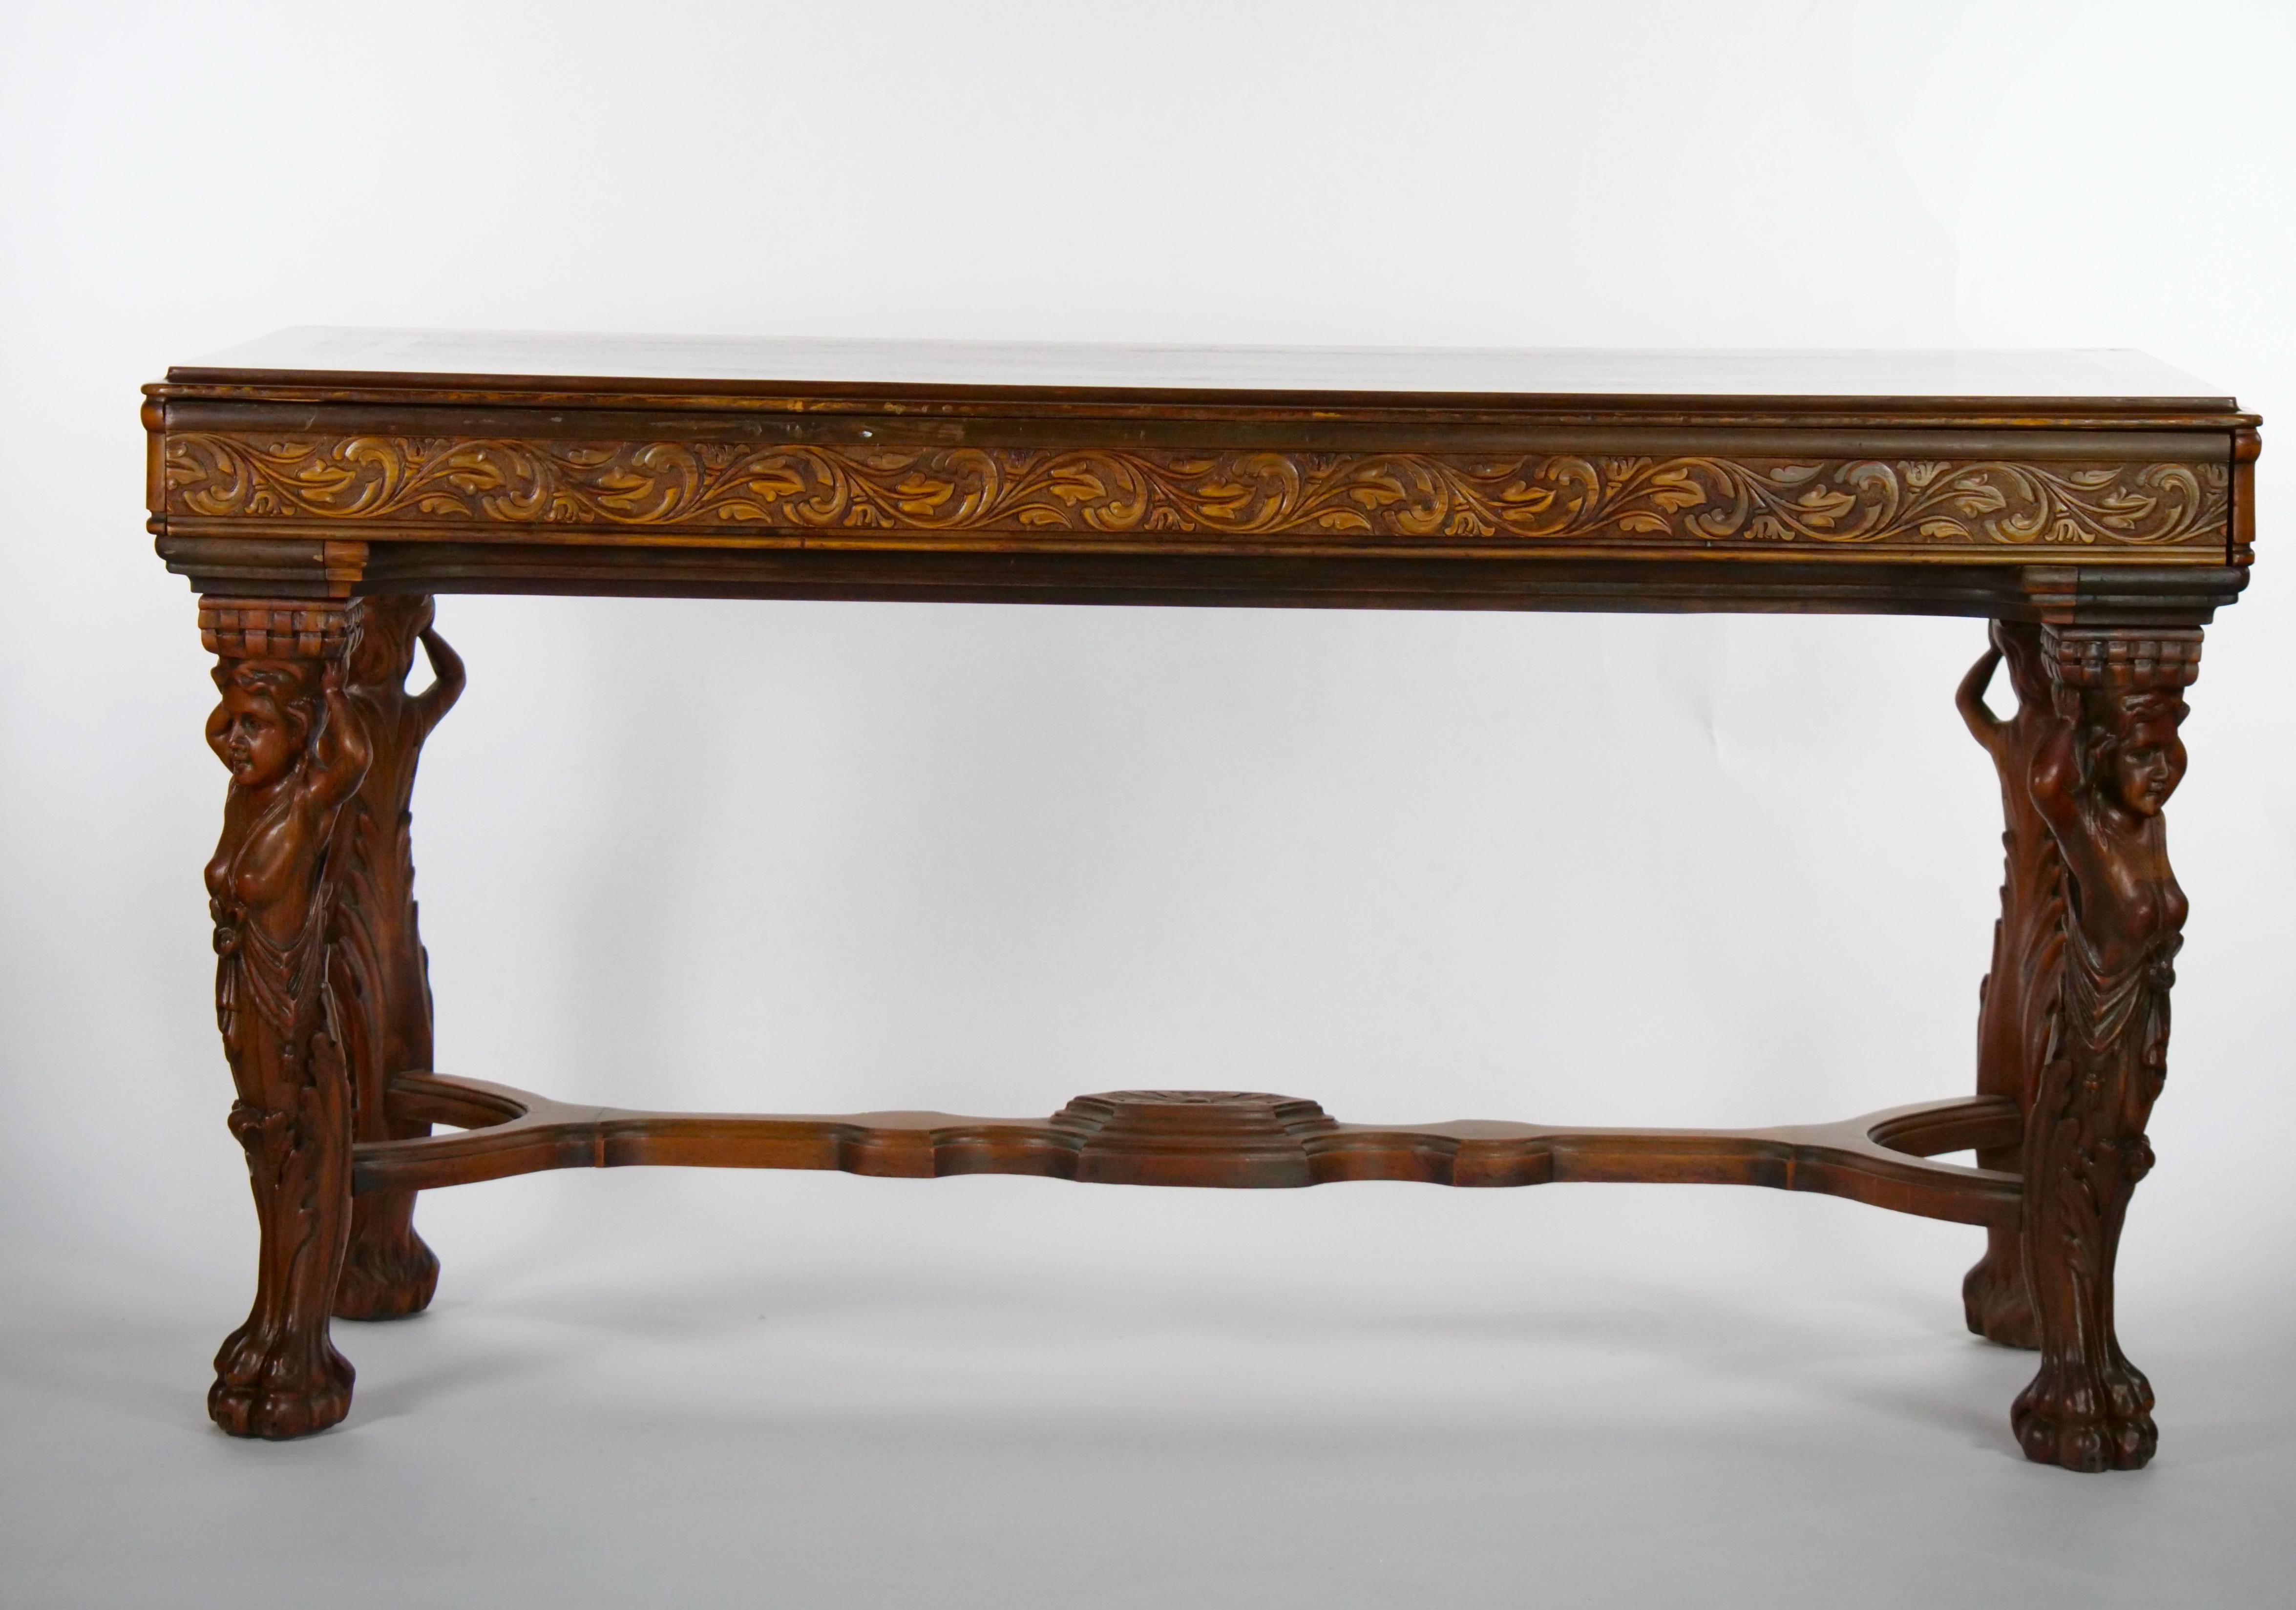 Beautiful craftsmanship mahogany Chippendale style 19th century hand carved walnut inlaid top console / center table. The table features heavily hand carved cabriole figure holing legs design with paw feet. It is just exquisitely crafted and carved